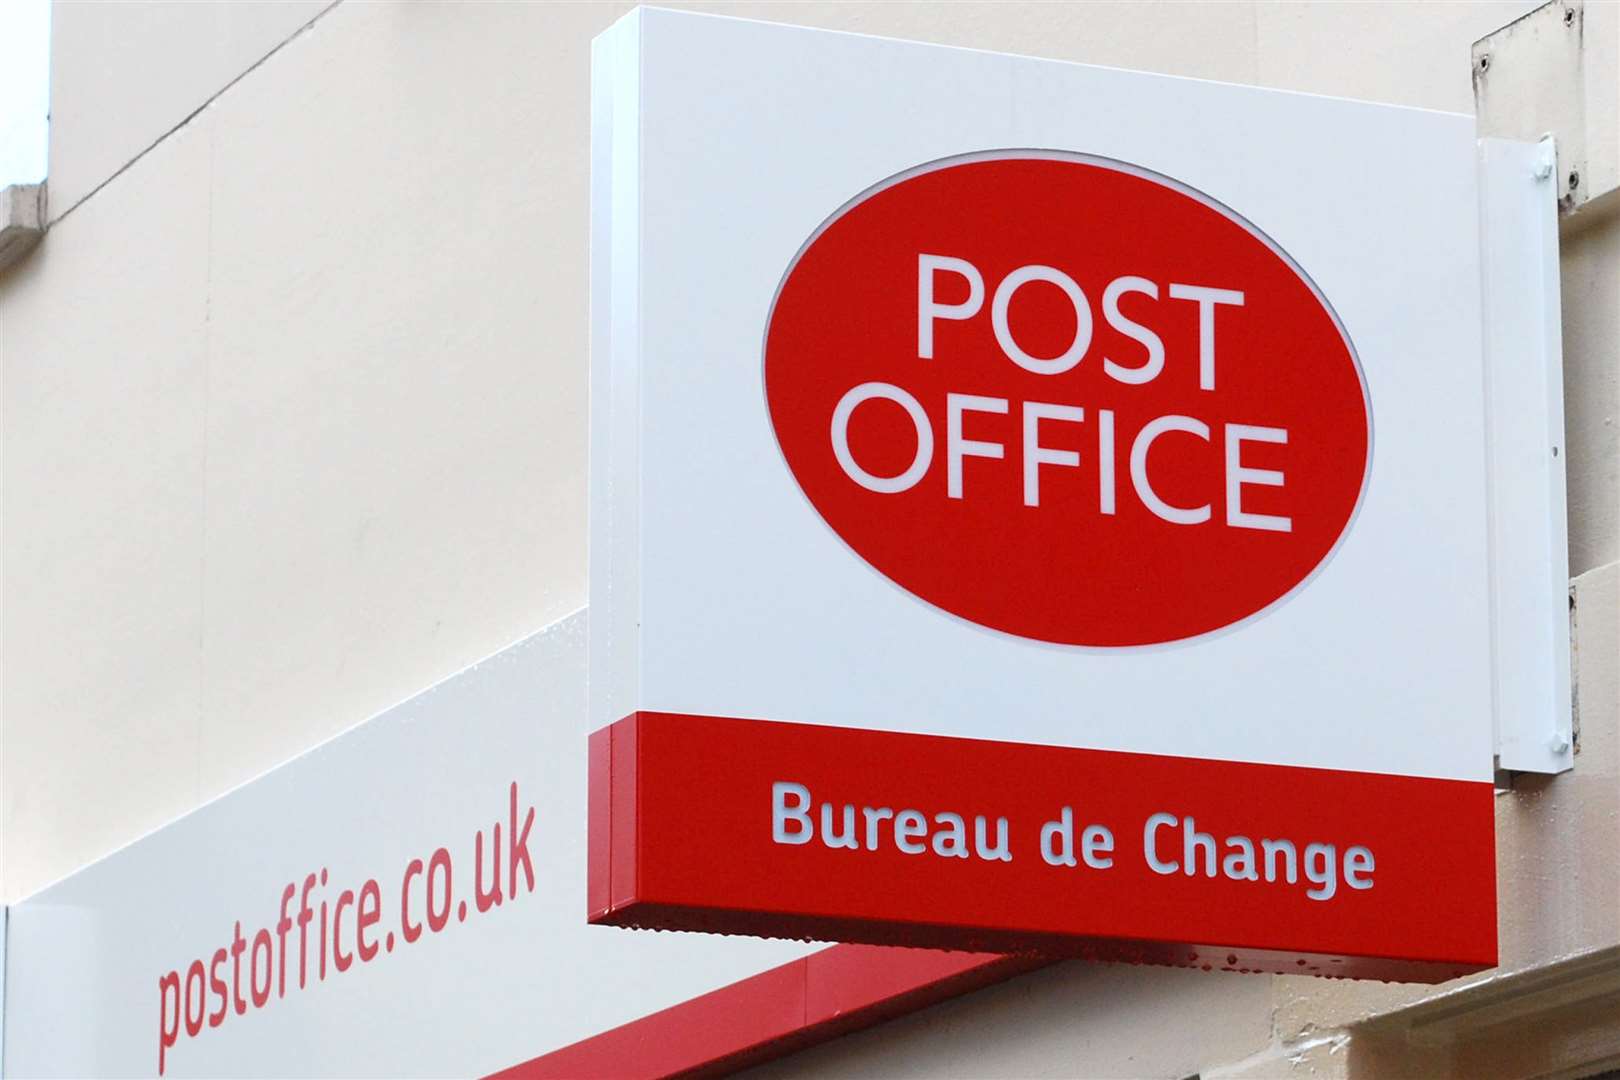 More than 700 subpostmasters were prosecuted by the Post Office and handed criminal convictions between 1999 and 2015 (PA)